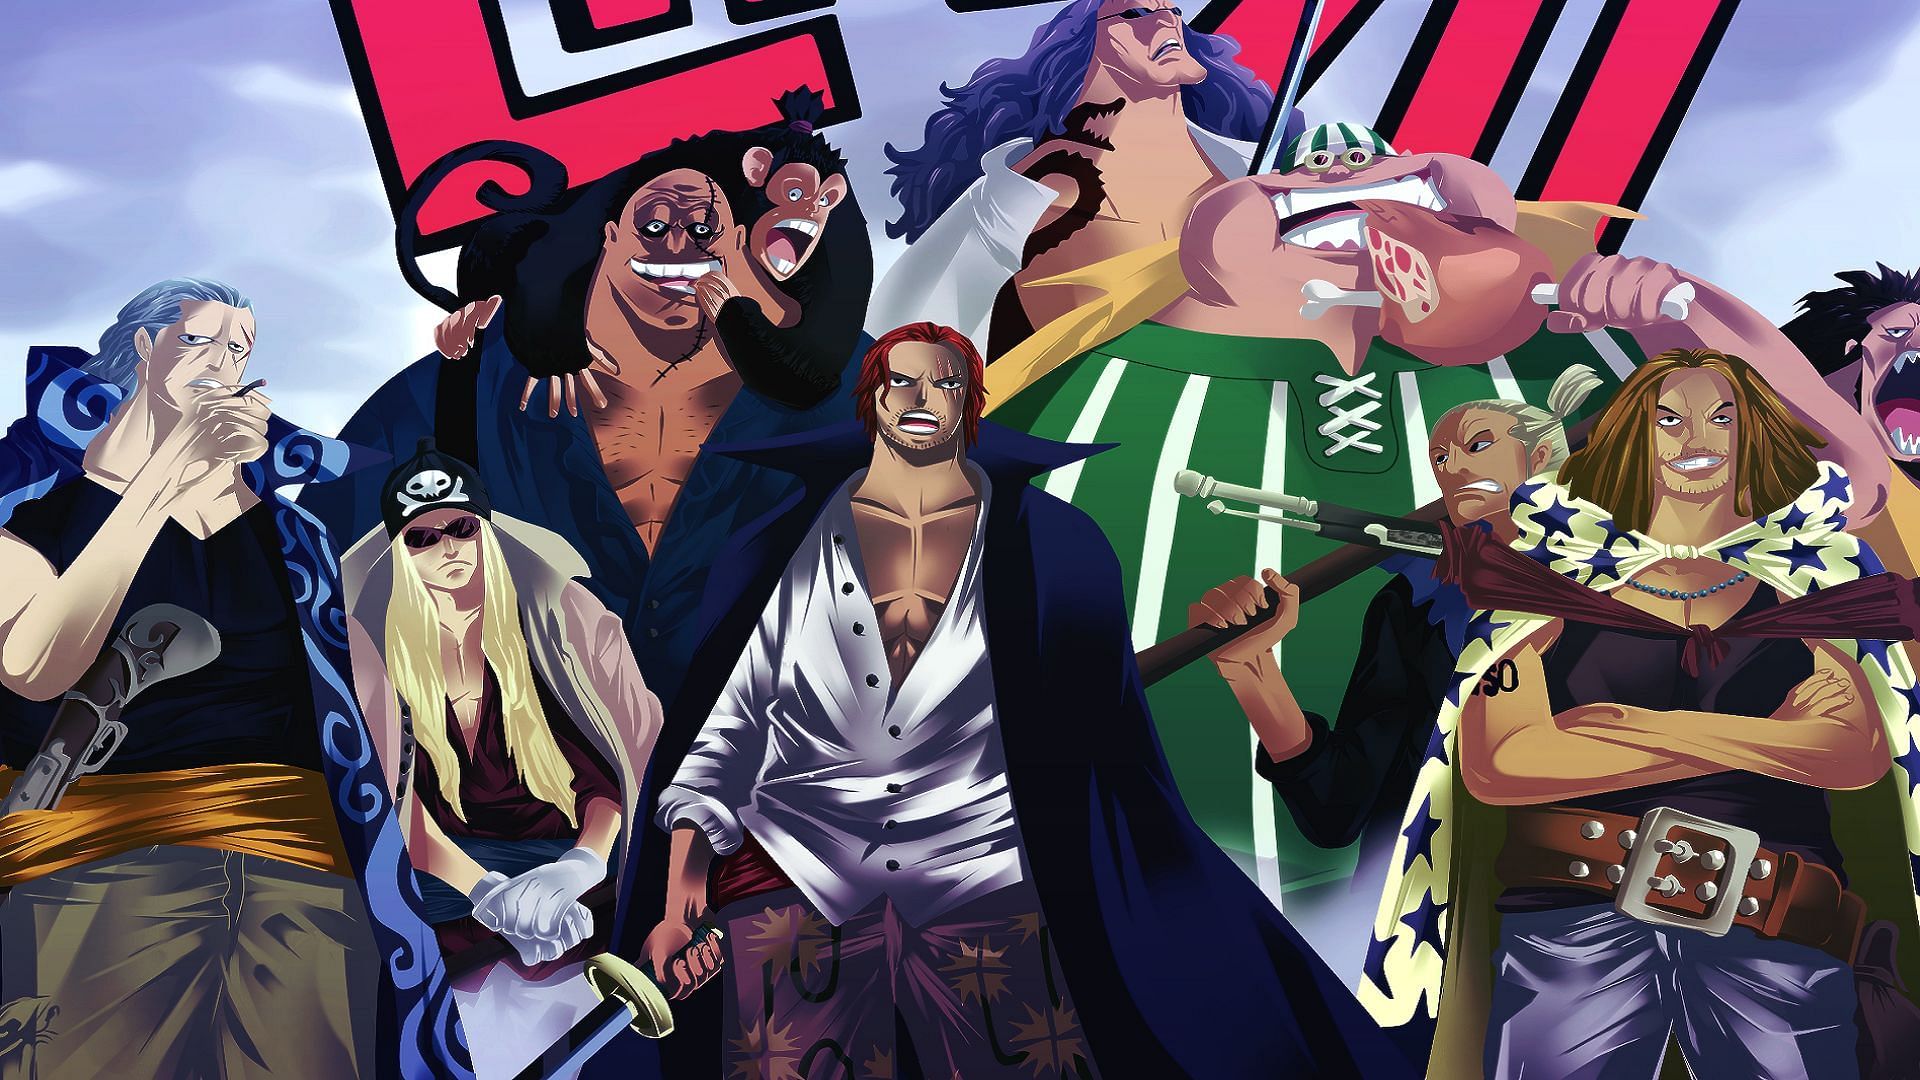 10 Coolest One Piece Character Designs And Their Real-World Inspirations